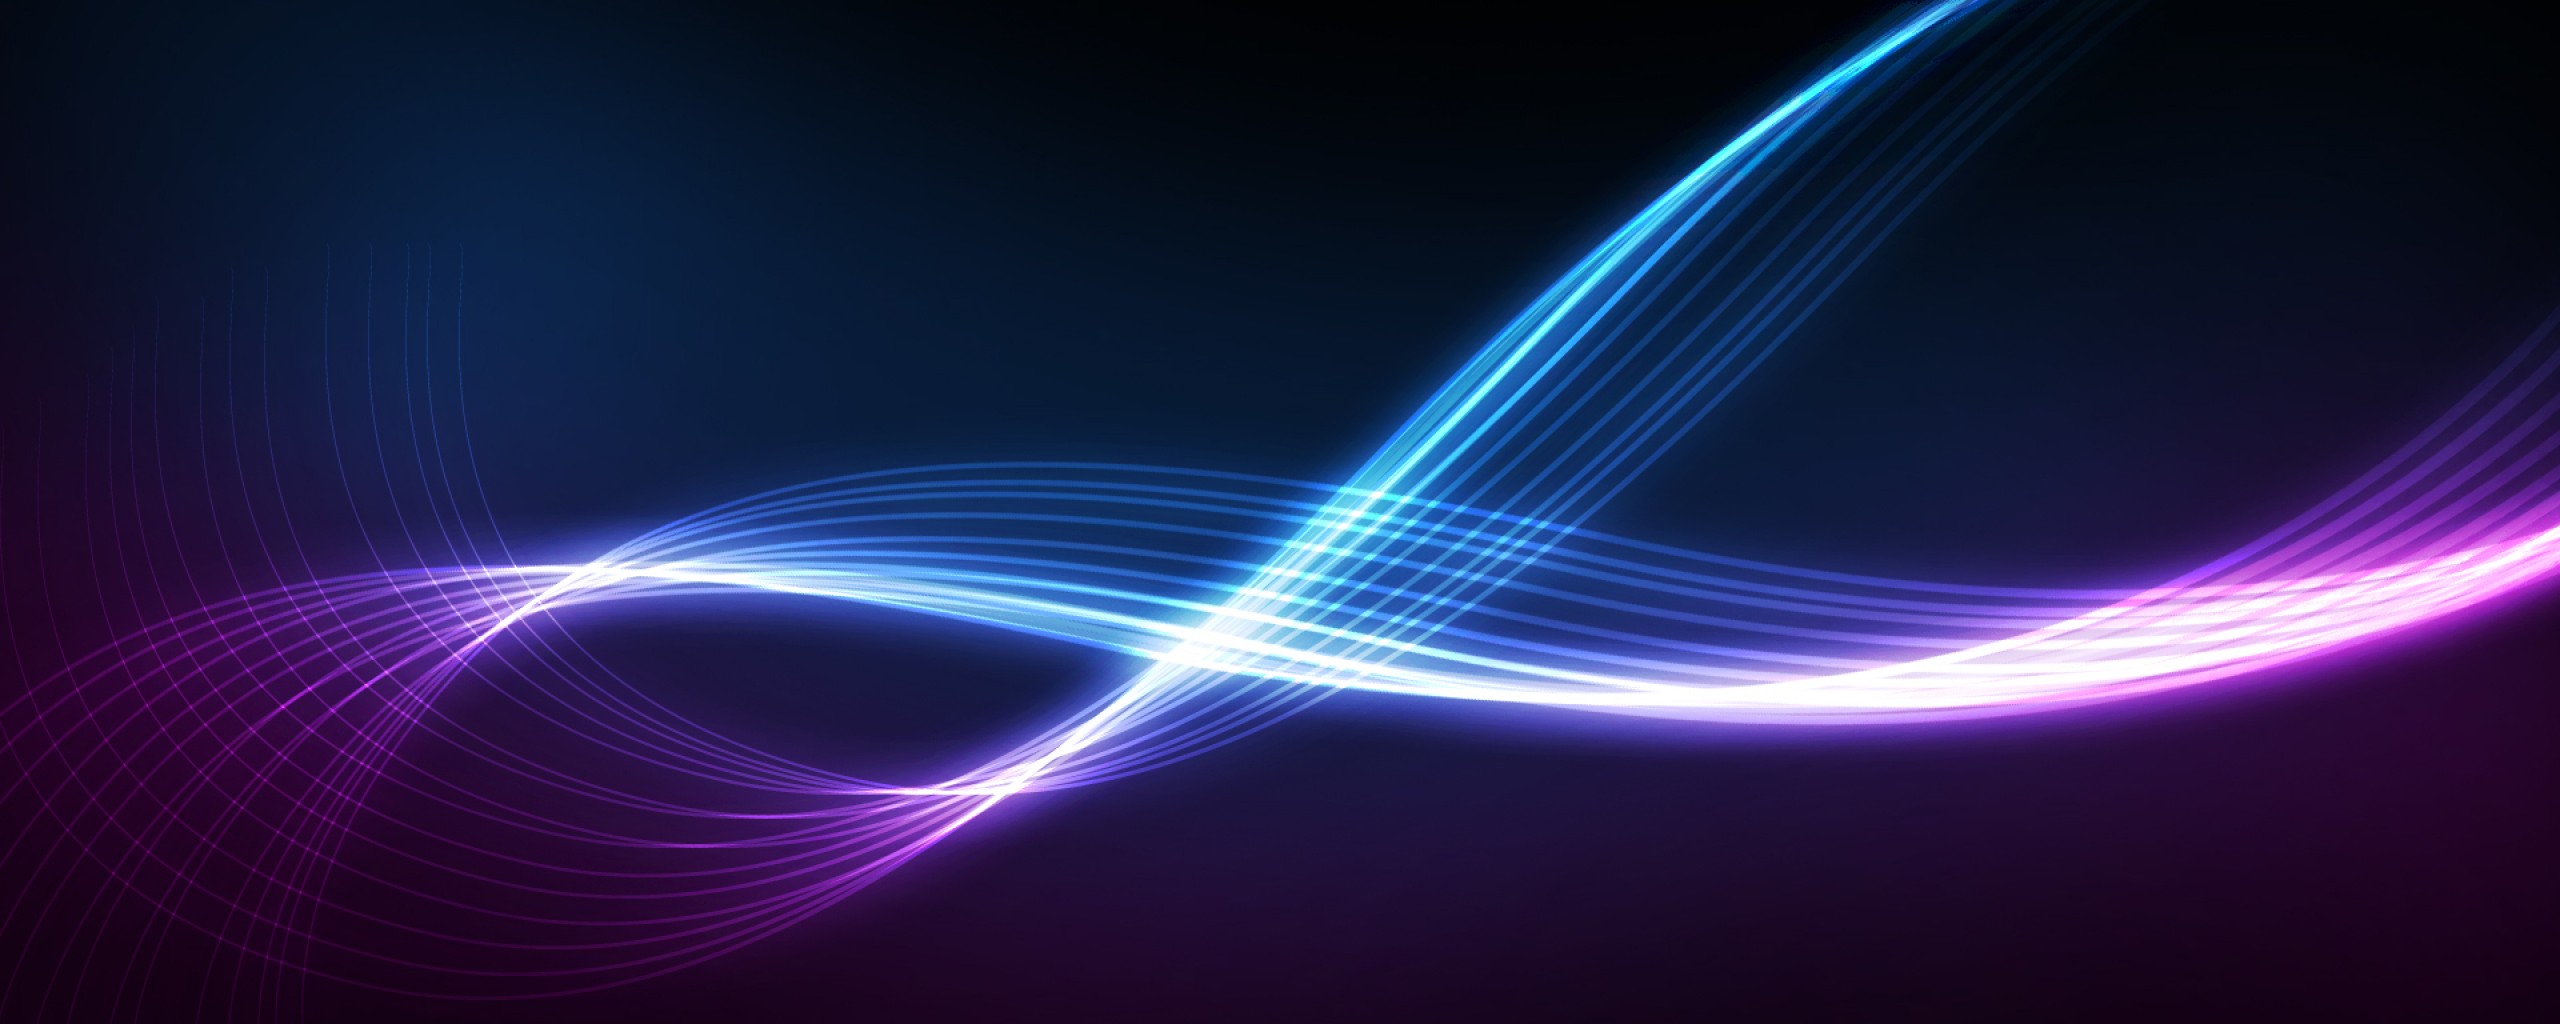 Purple And Blue Wallpaper HD Background